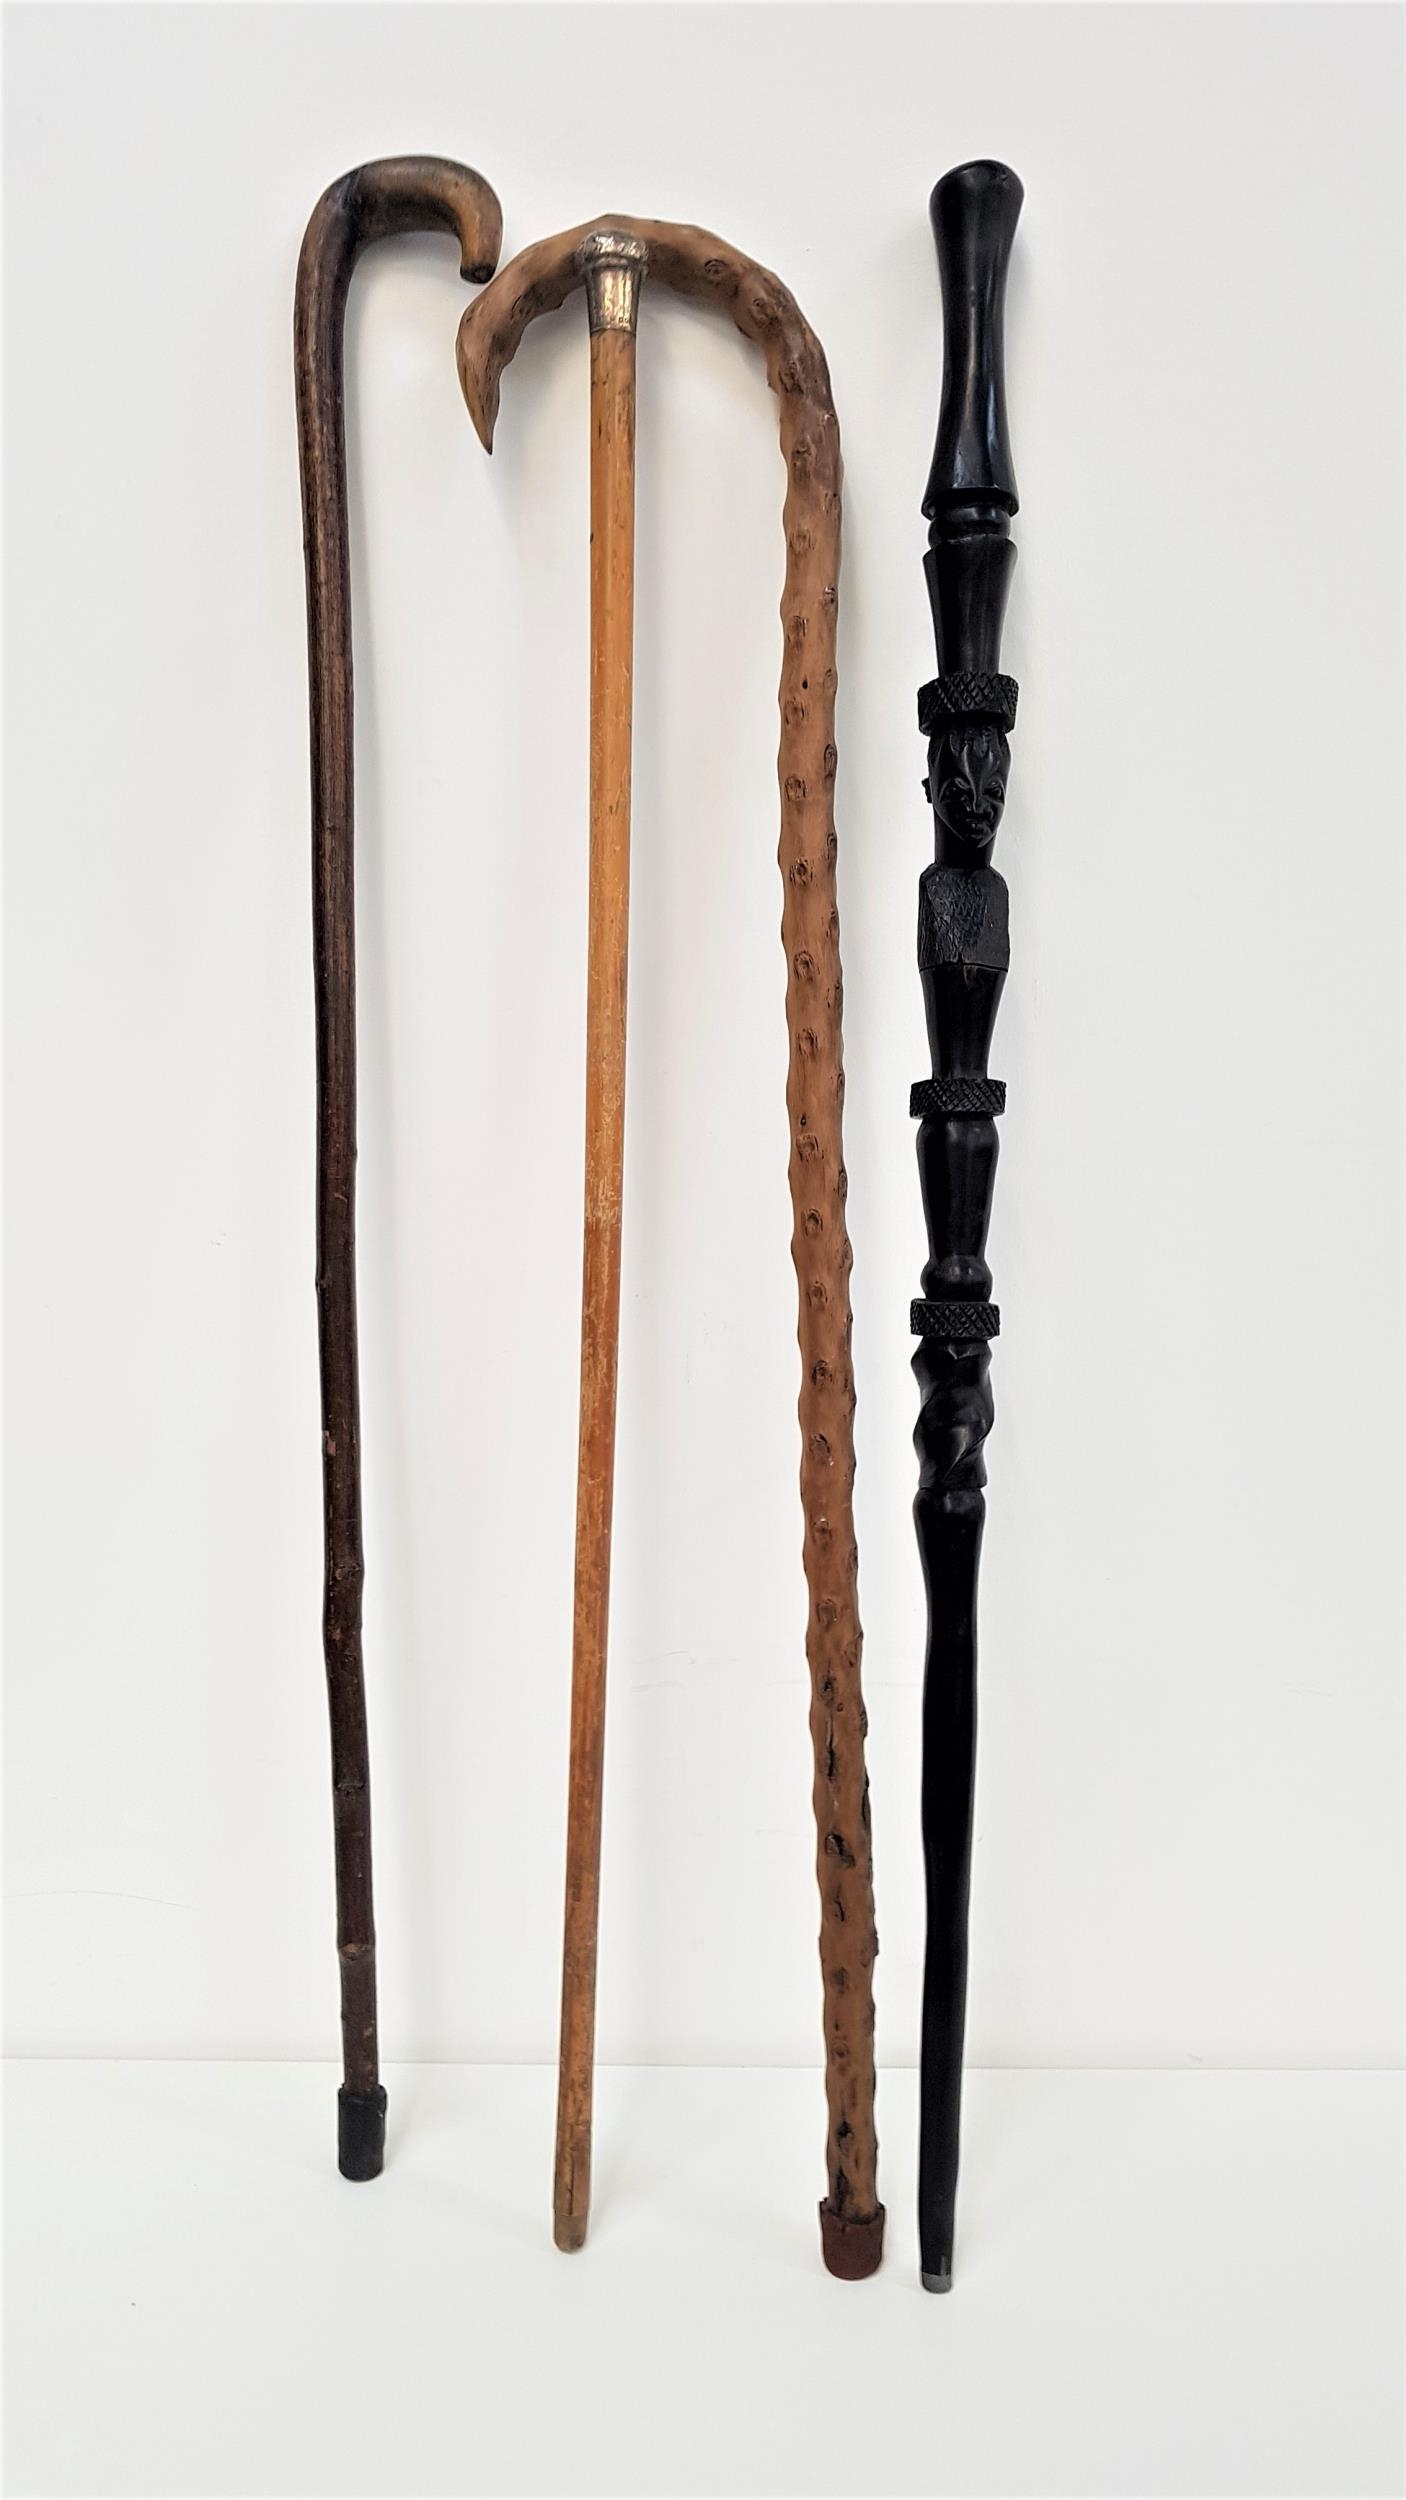 BENIN CARVED EBONY WALKING STICK with face mask detail, 92cm long; together with a silver topped